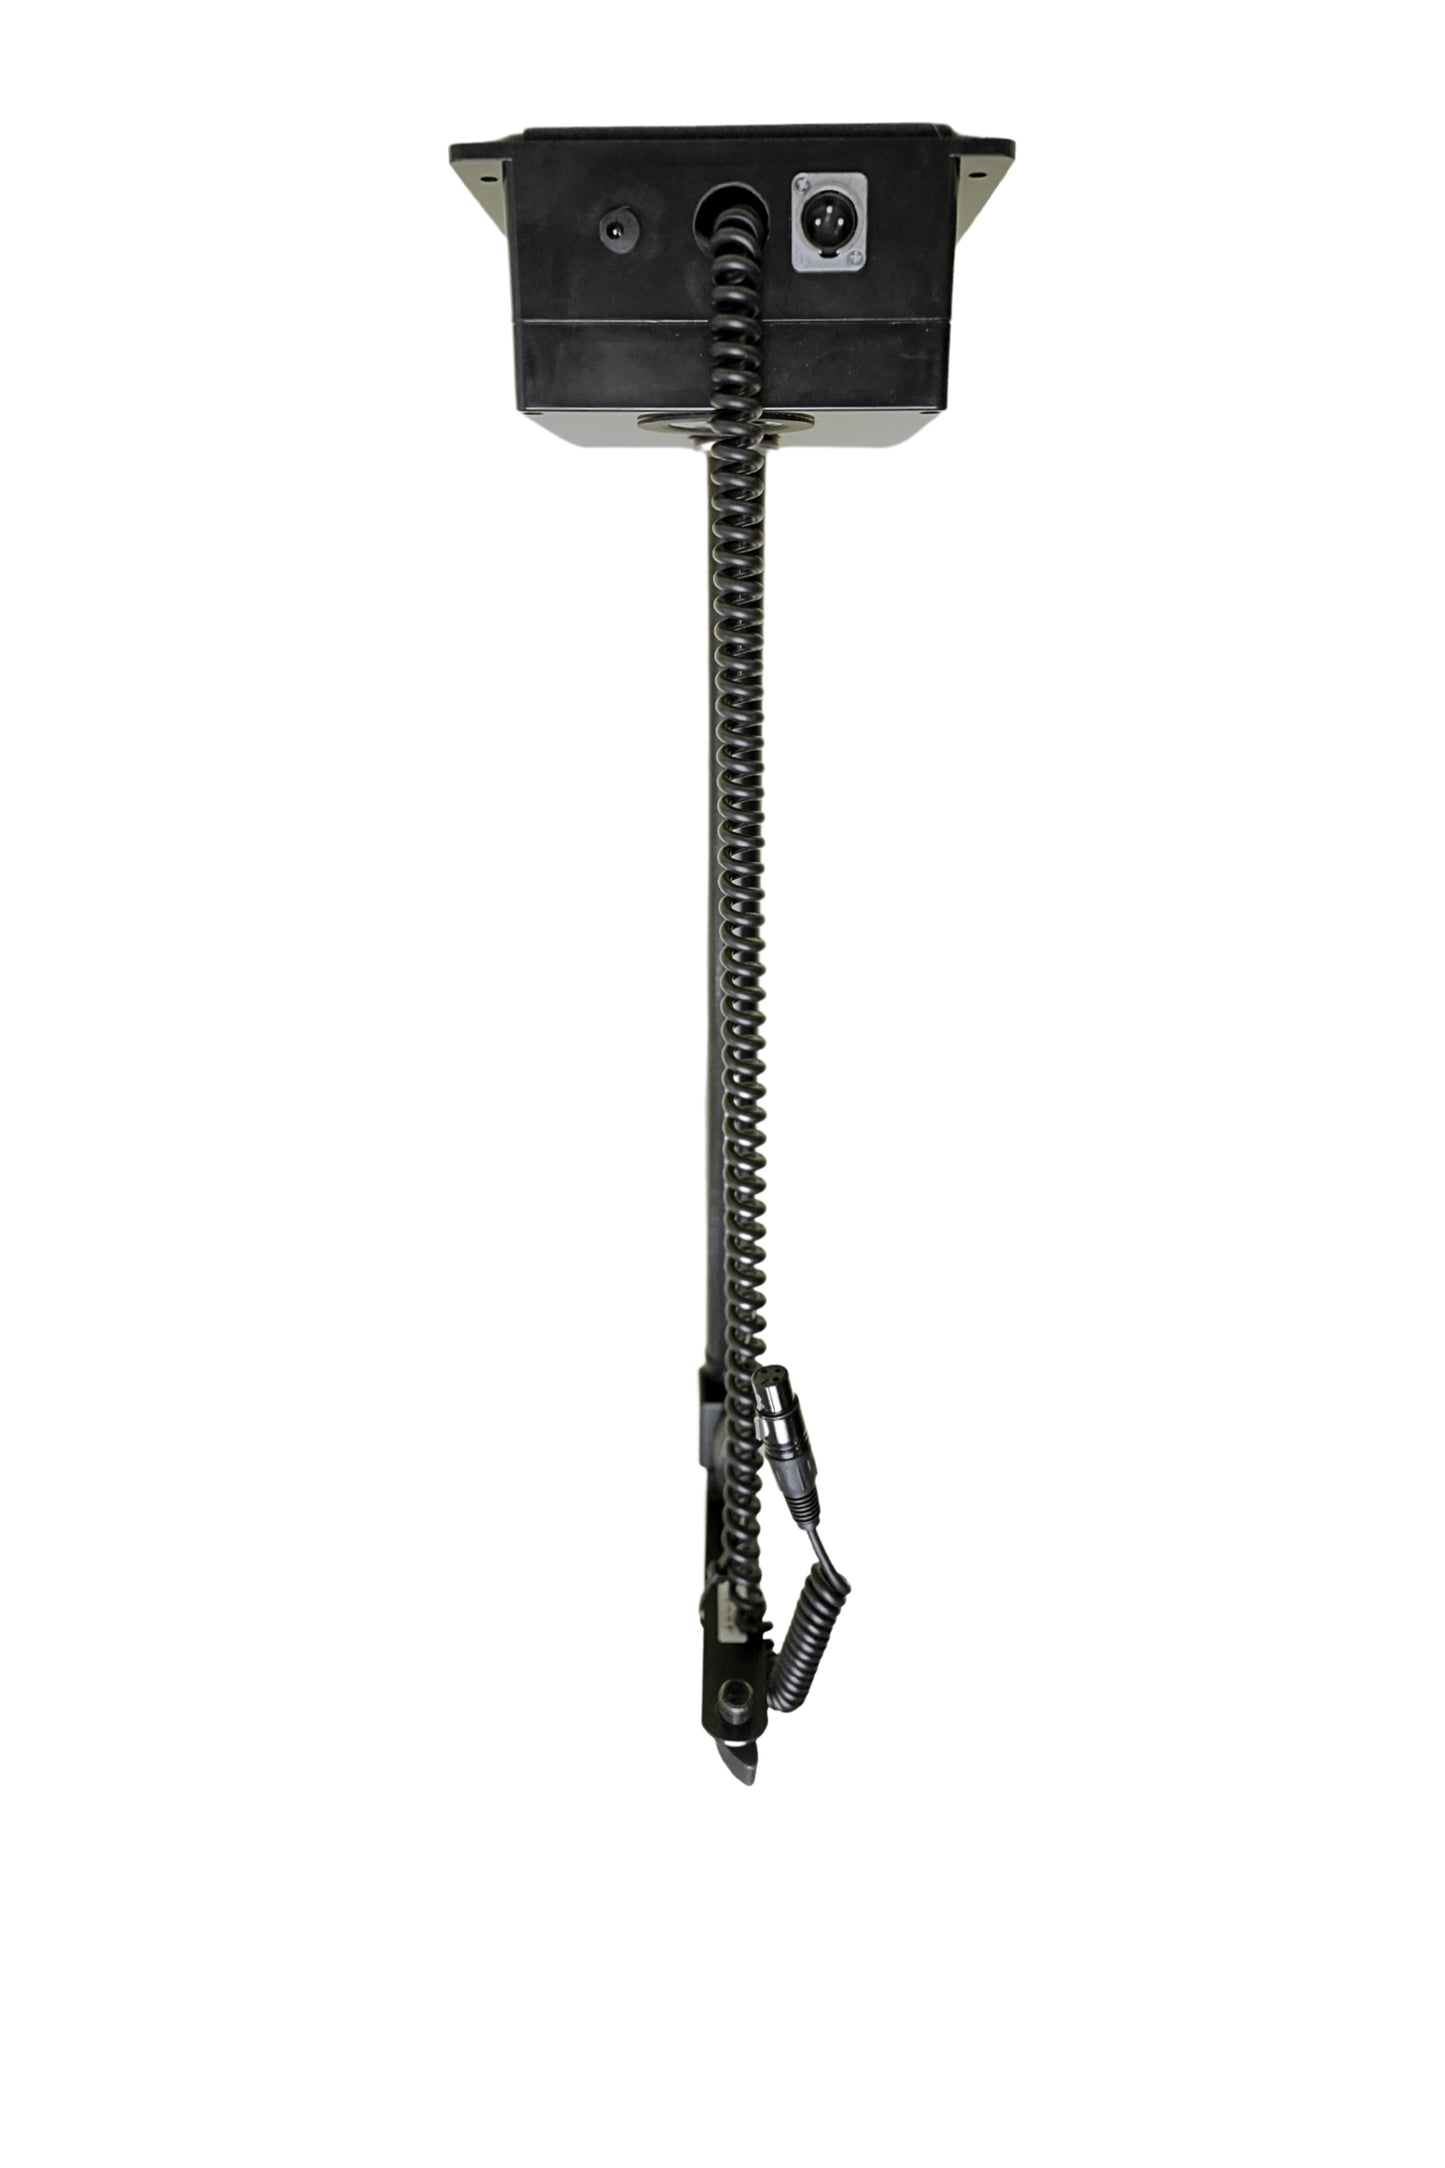 Adjustable Microphone Lift with Remote Control Ceiling Mount